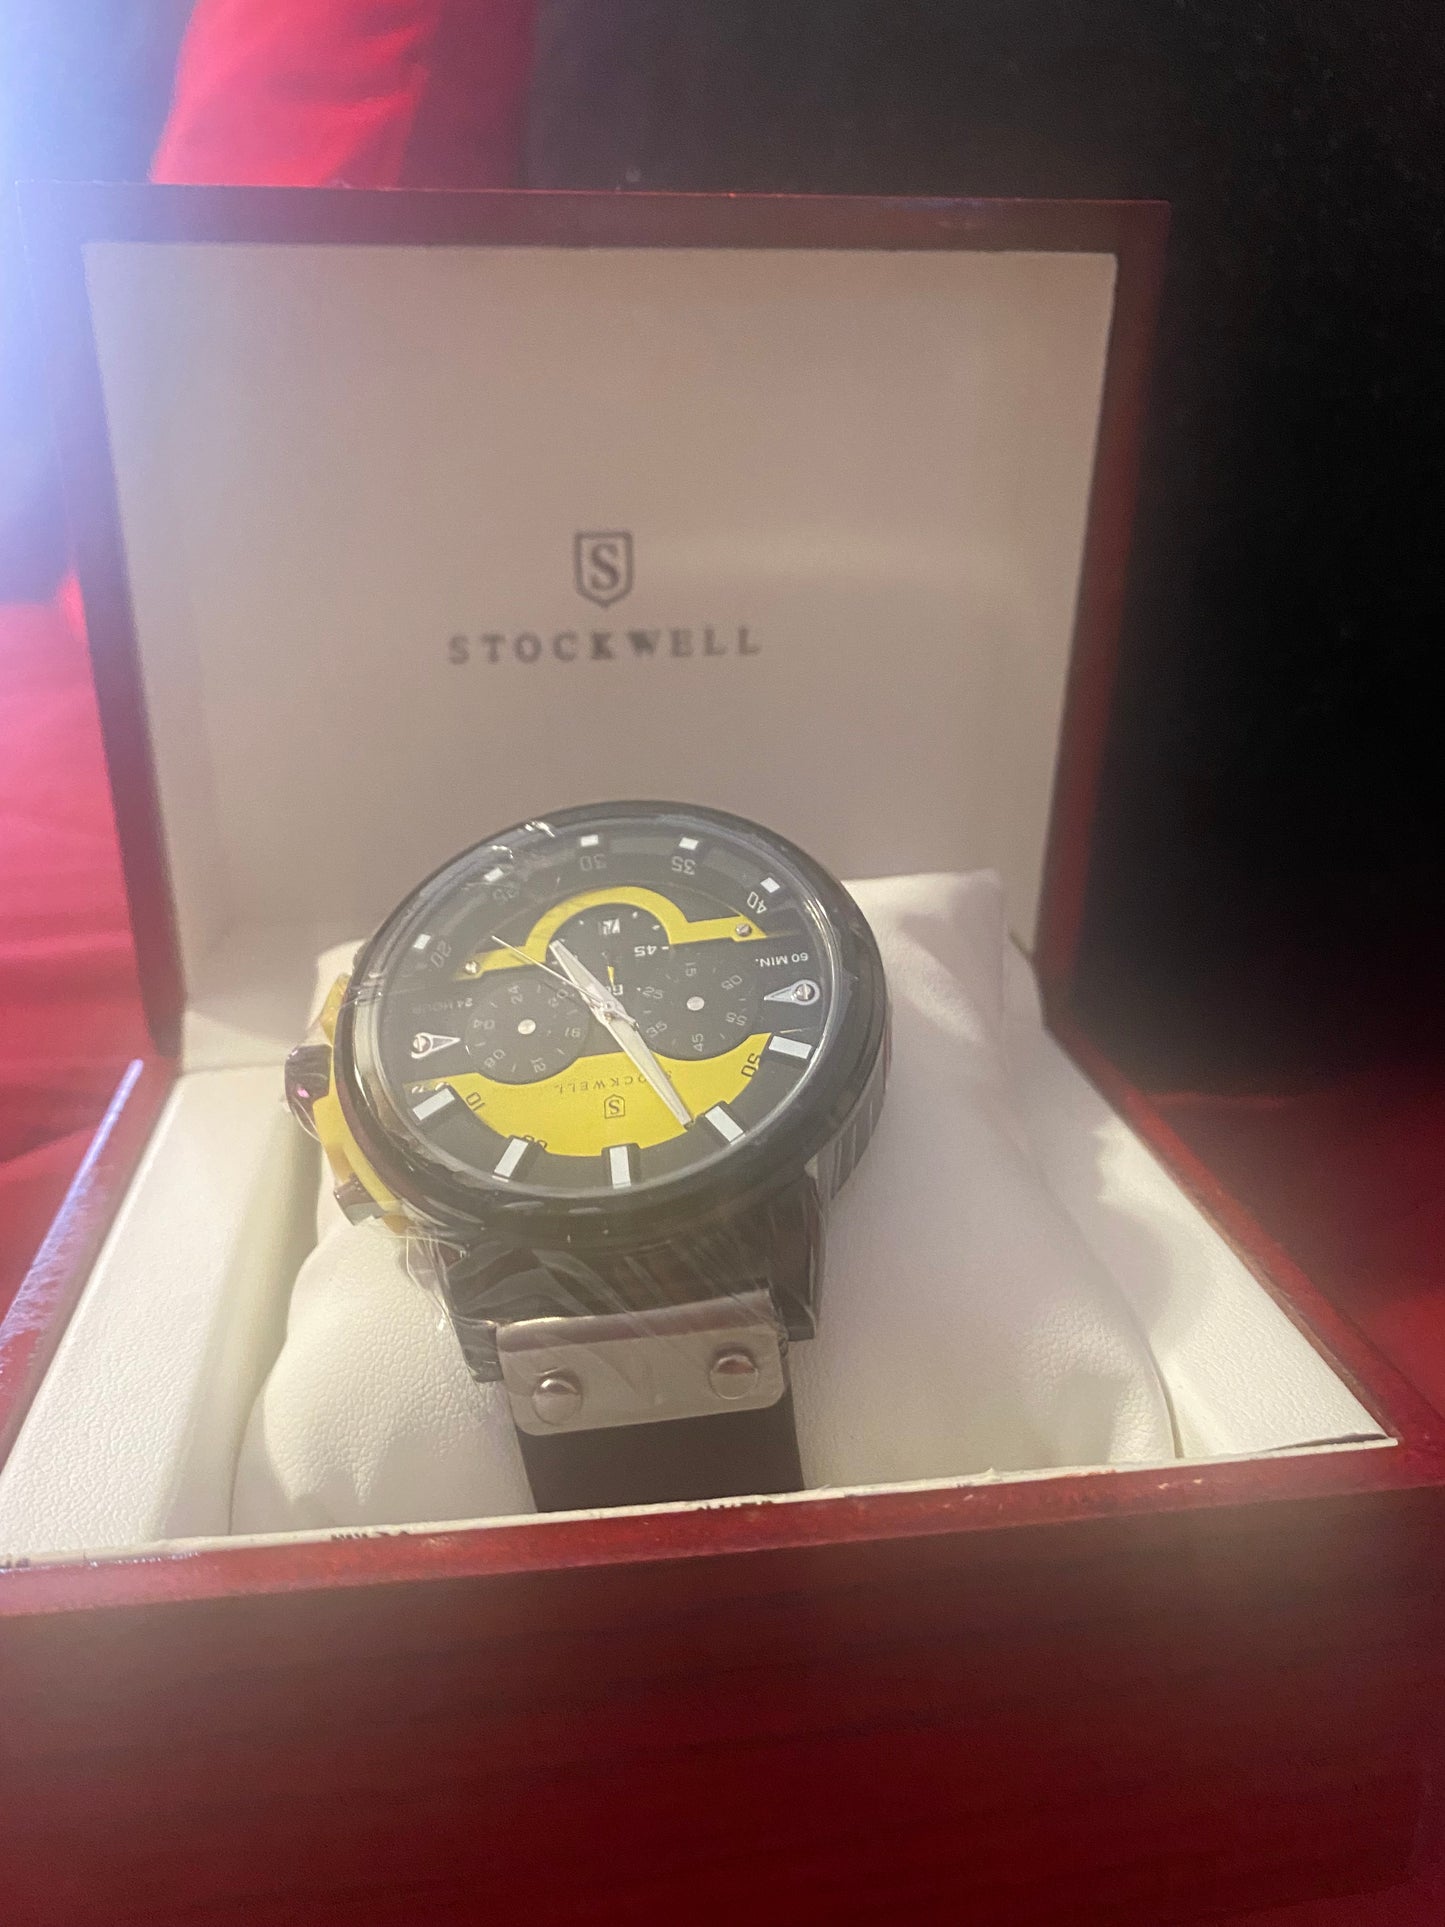 Stockwell Men's Chronograph Watch Limited Edition Motor Bike  Black & Yellow -New